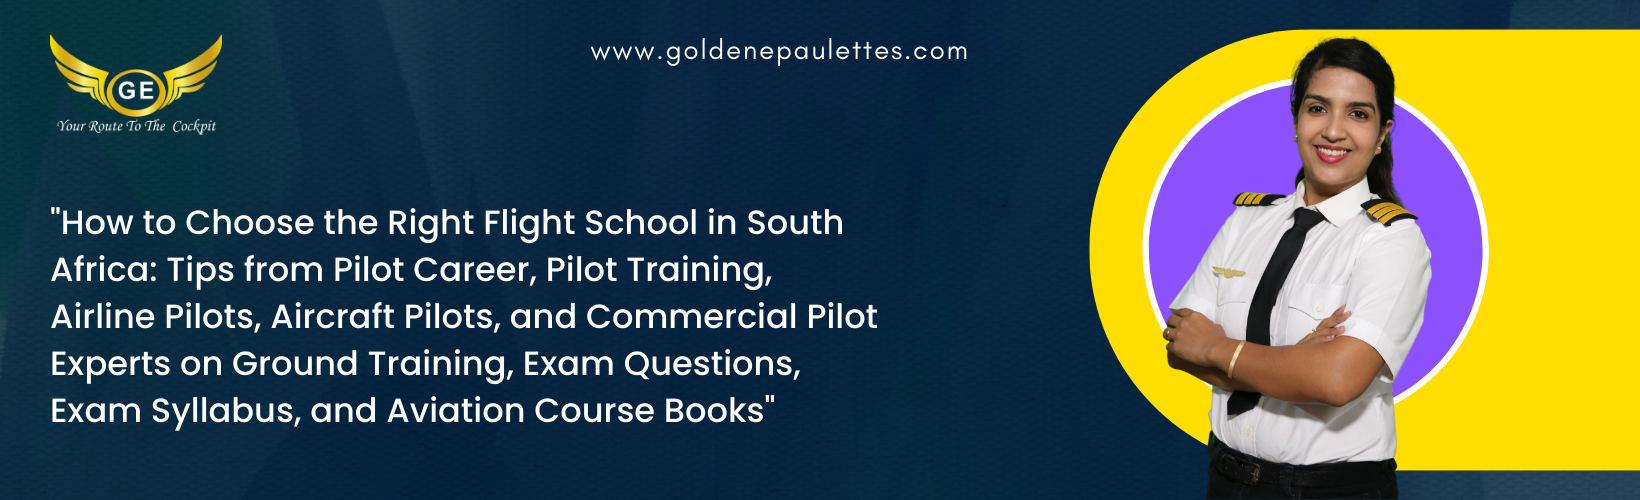 How to Choose the Right Flight School in South Africa